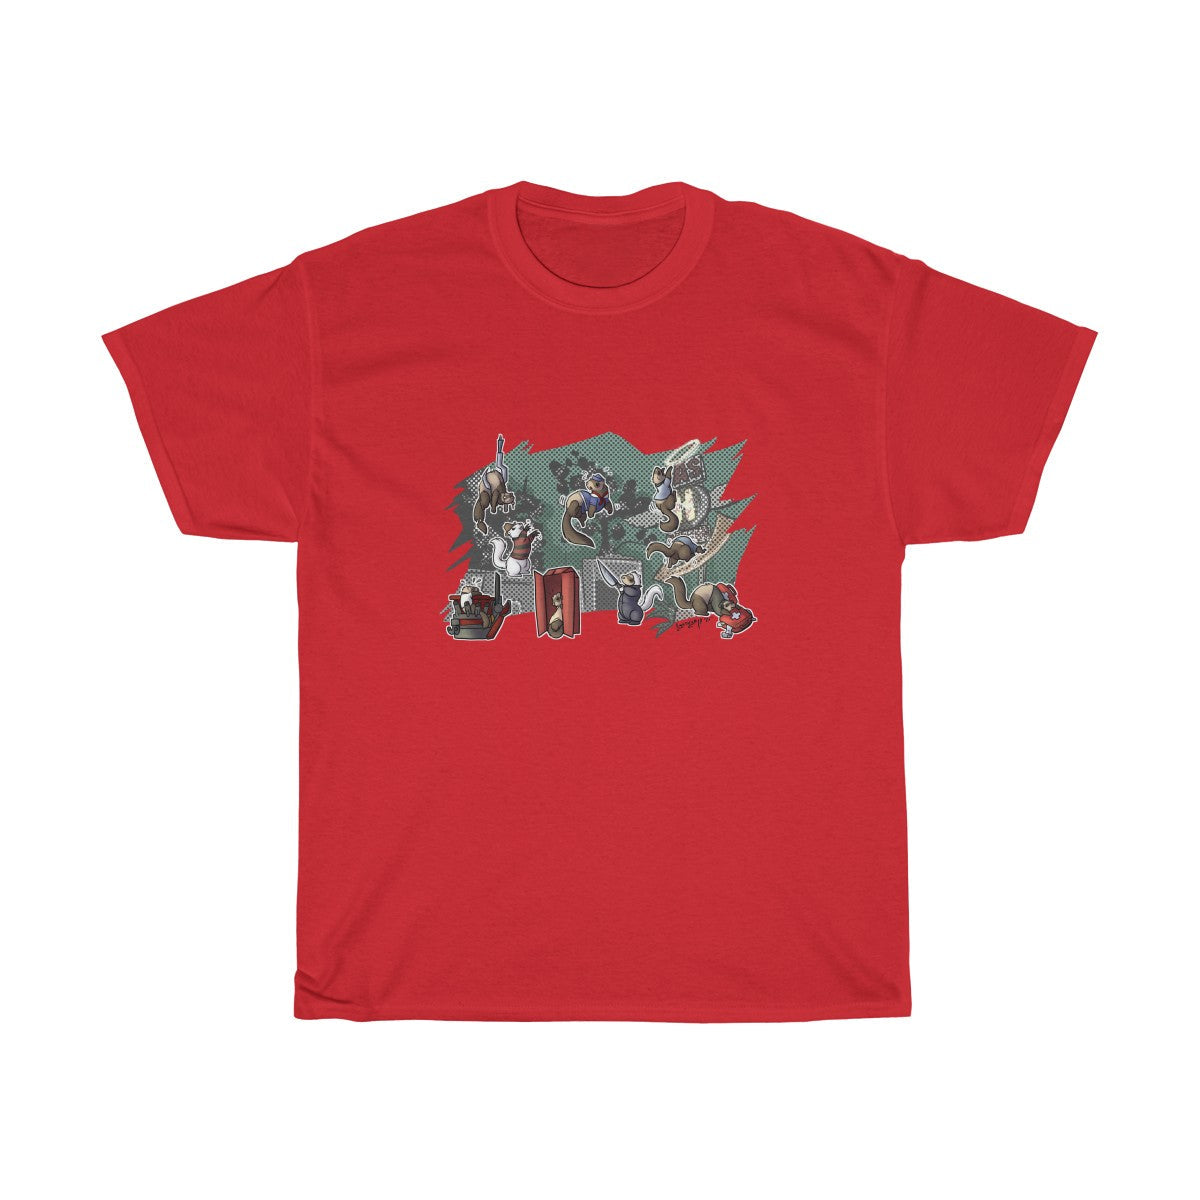 Thabo's Store - T-Shirt T-Shirt Thabo Meerkat Red S 